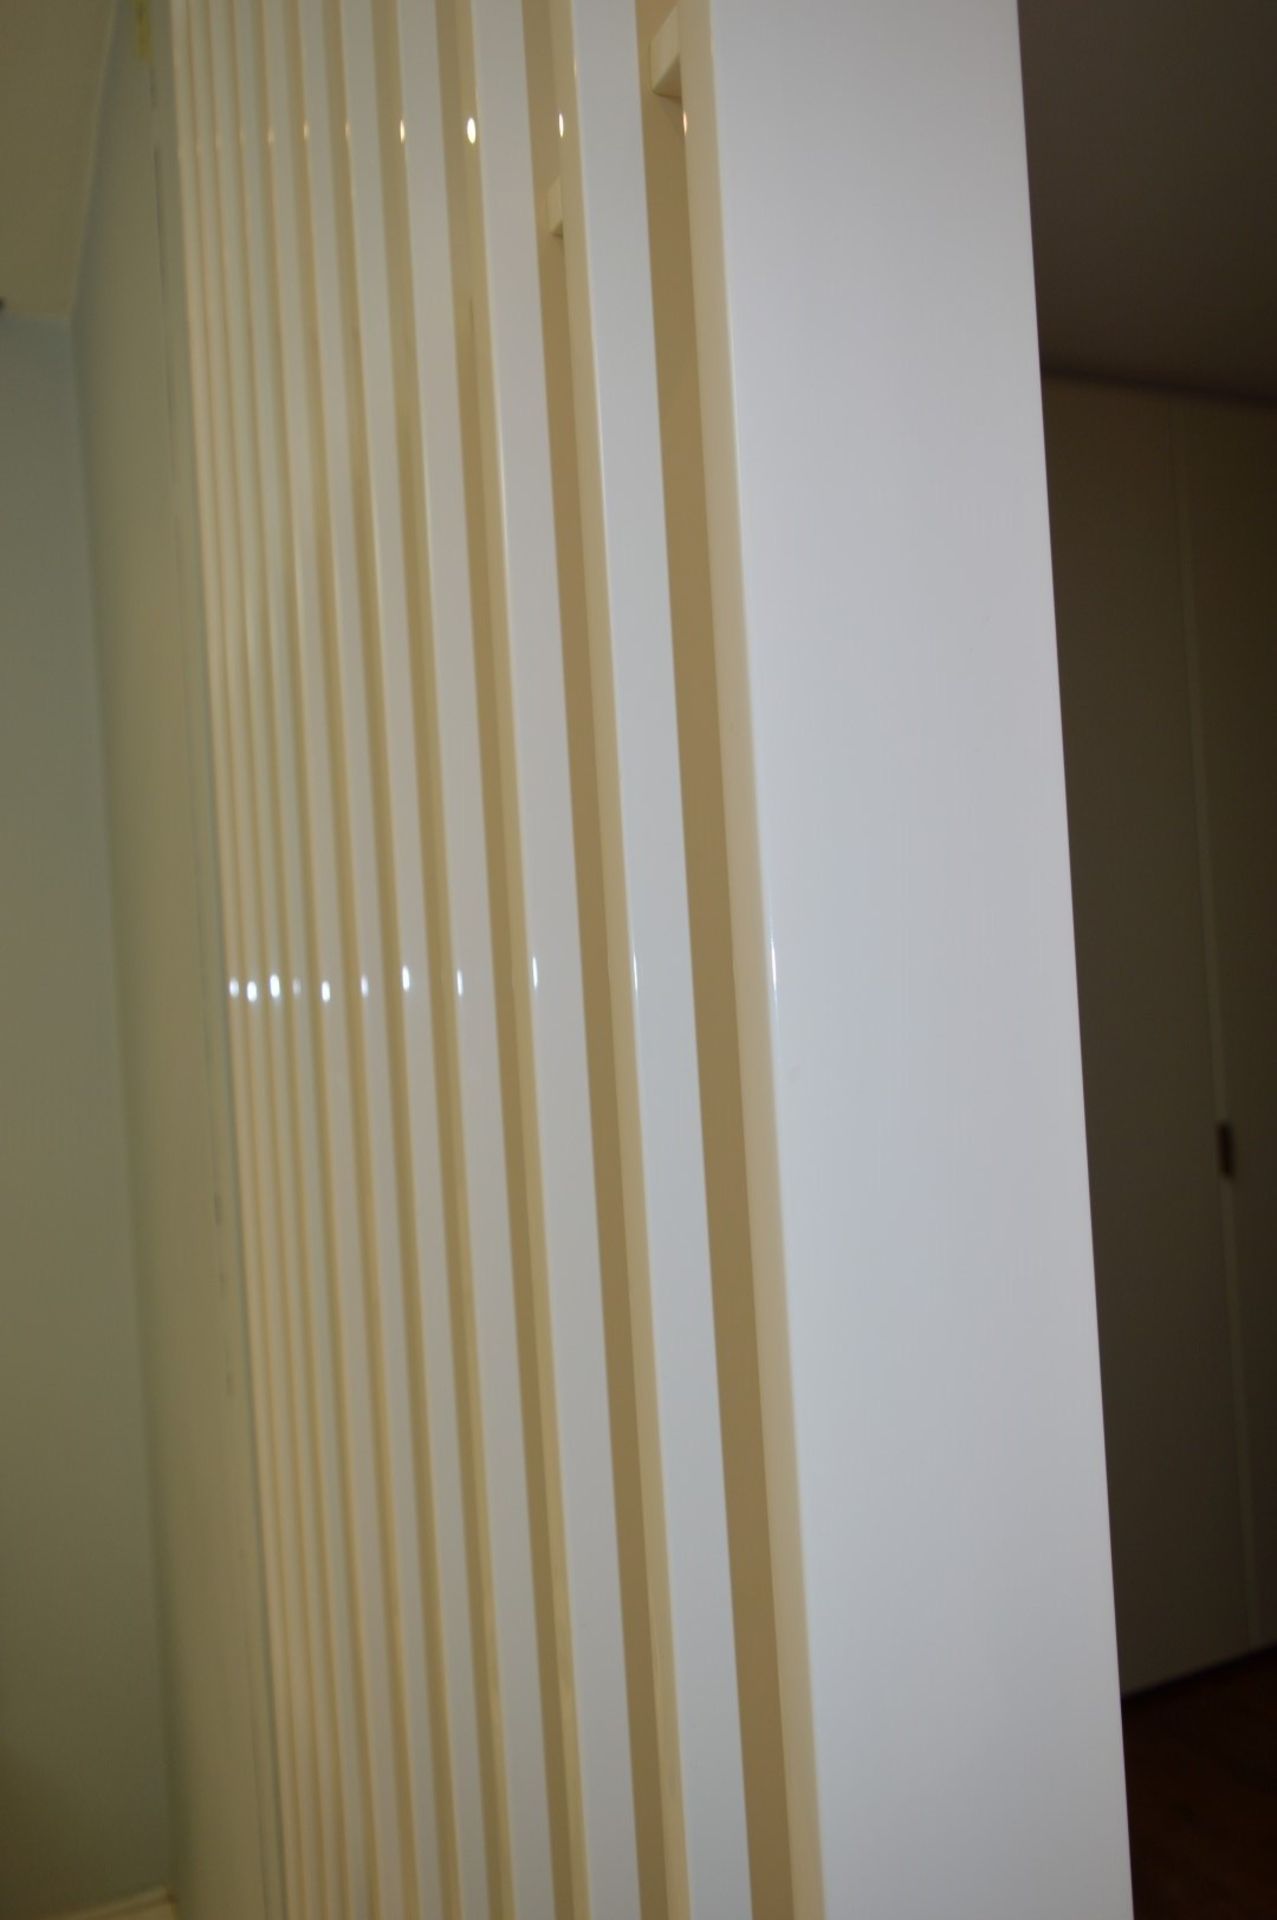 1 x Bathroom Wall Divider - Ref 54 - H262 x W107 x D10 cms - CL230 - Location: London NW8 - NO VAT - Image 3 of 8